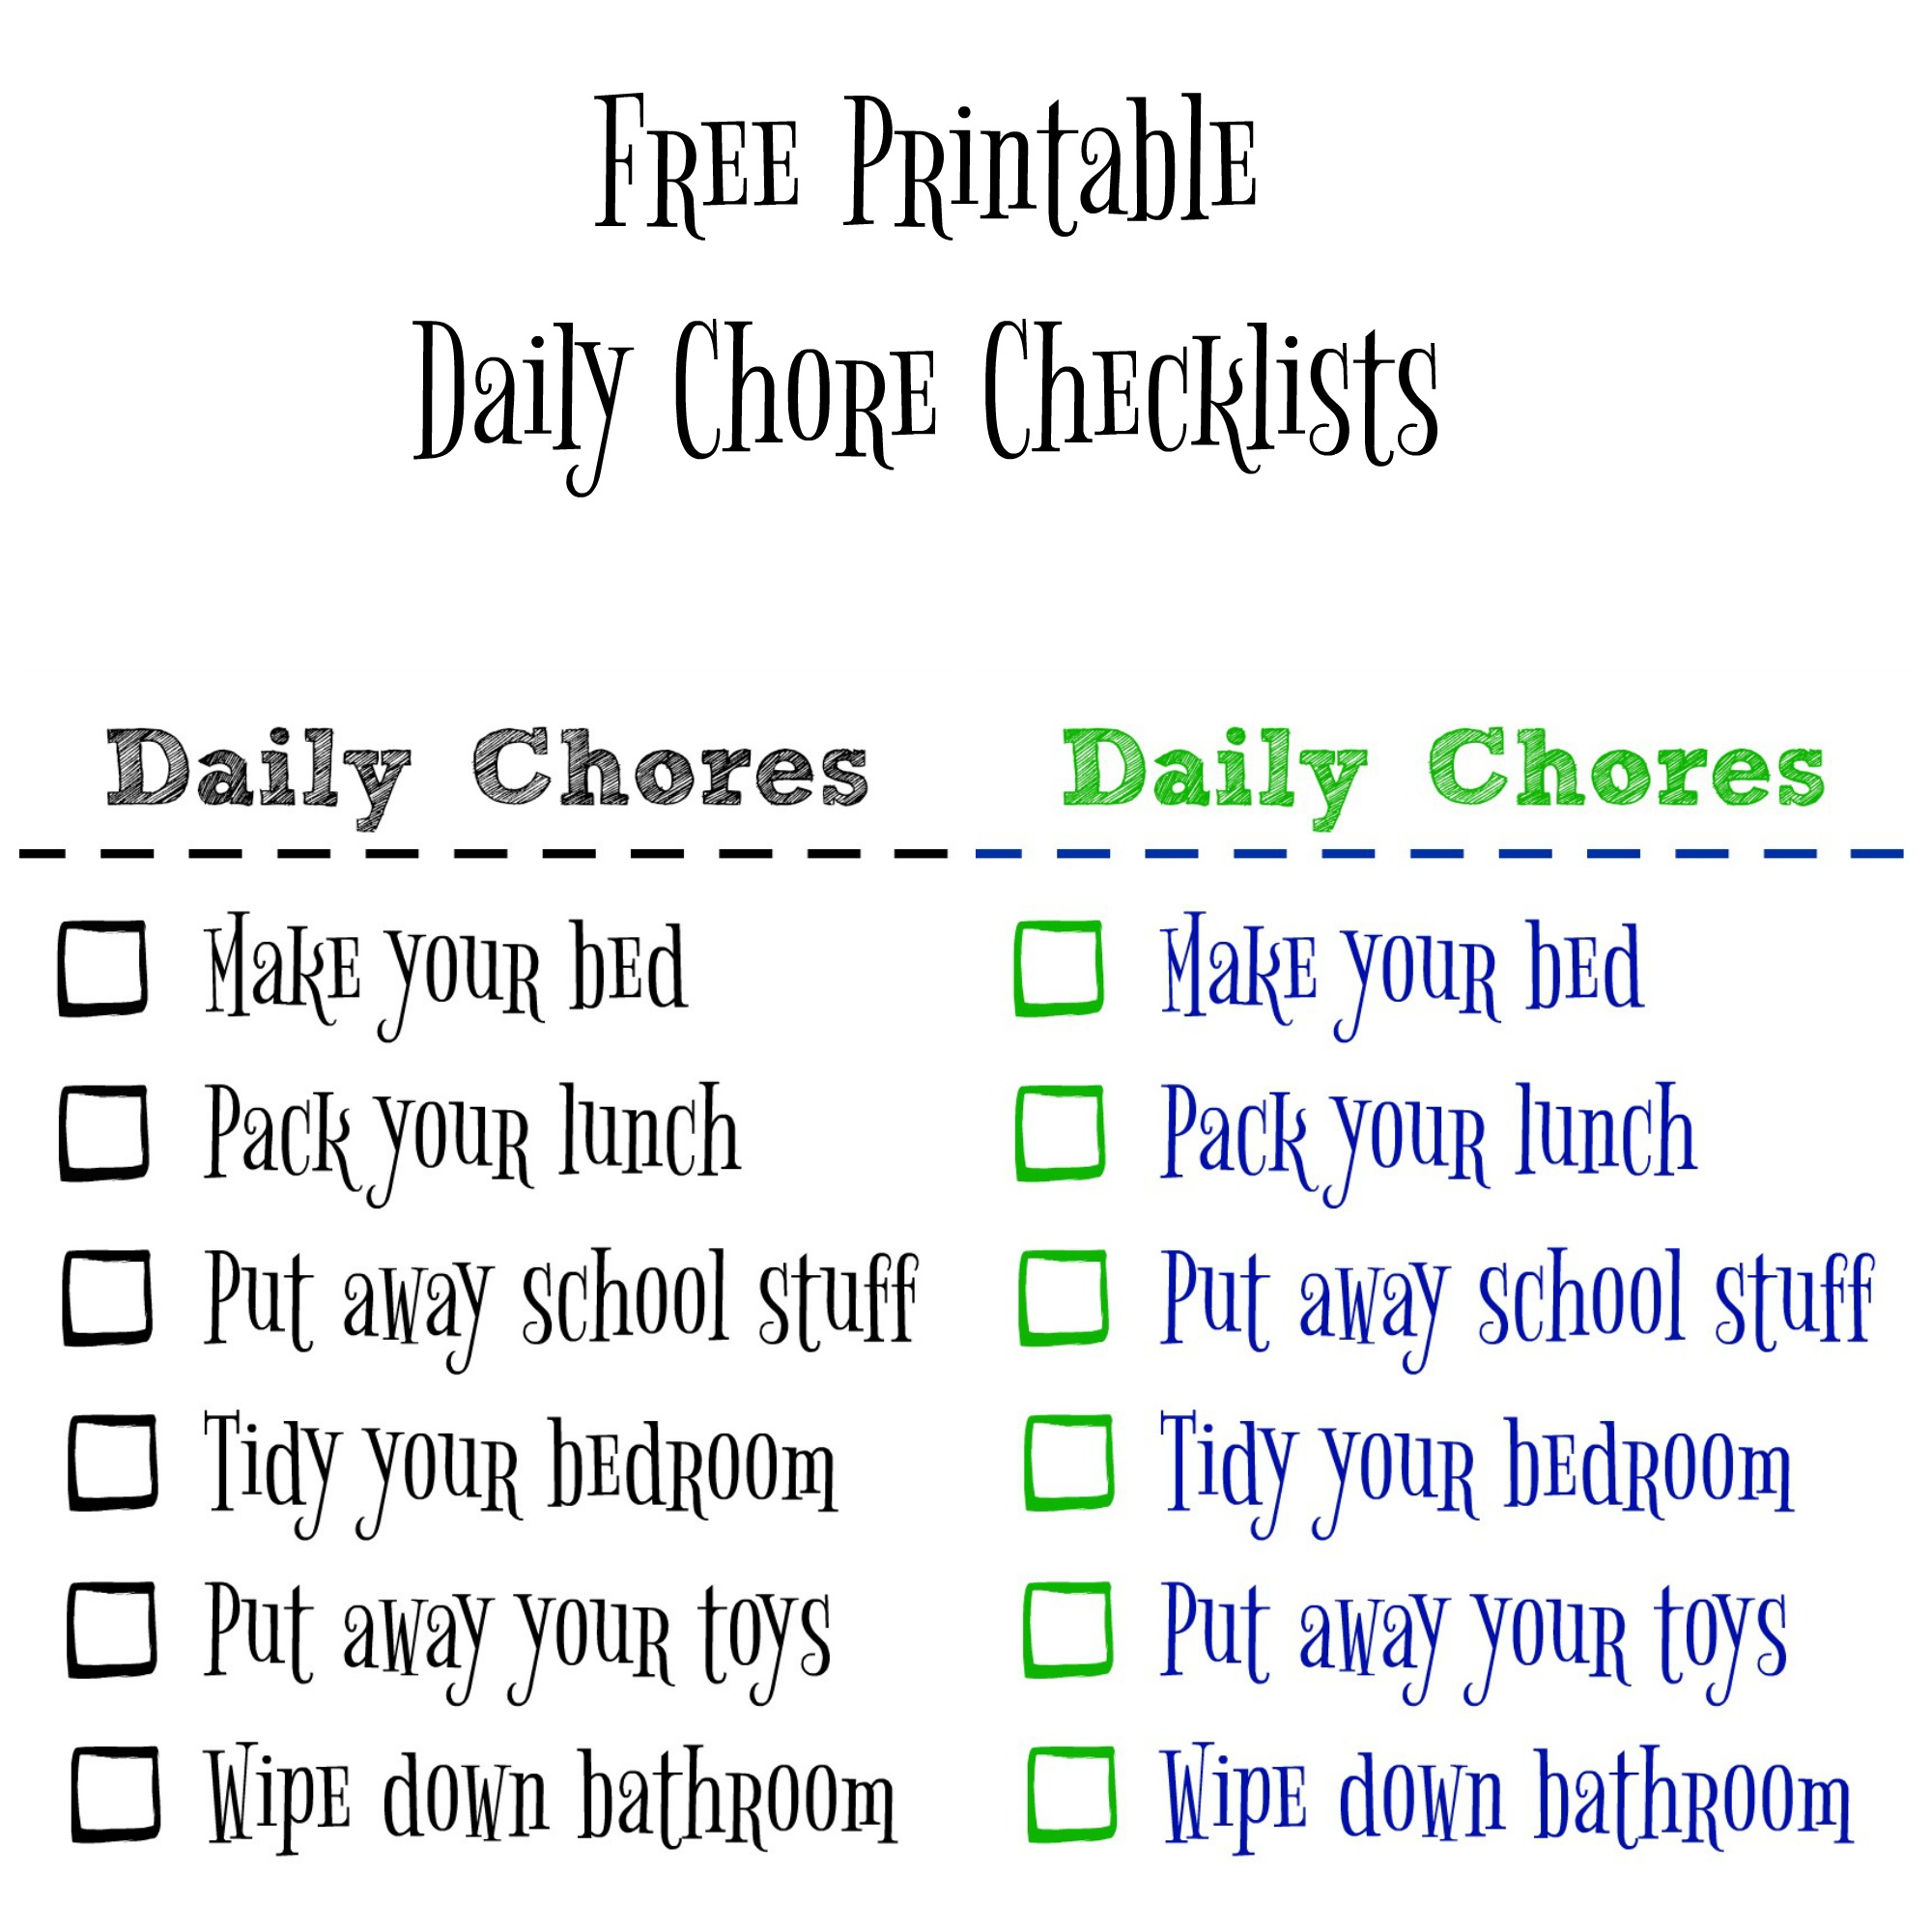 Teaching Kids to be Clean & Organized with a Free Printable Chore Checklist